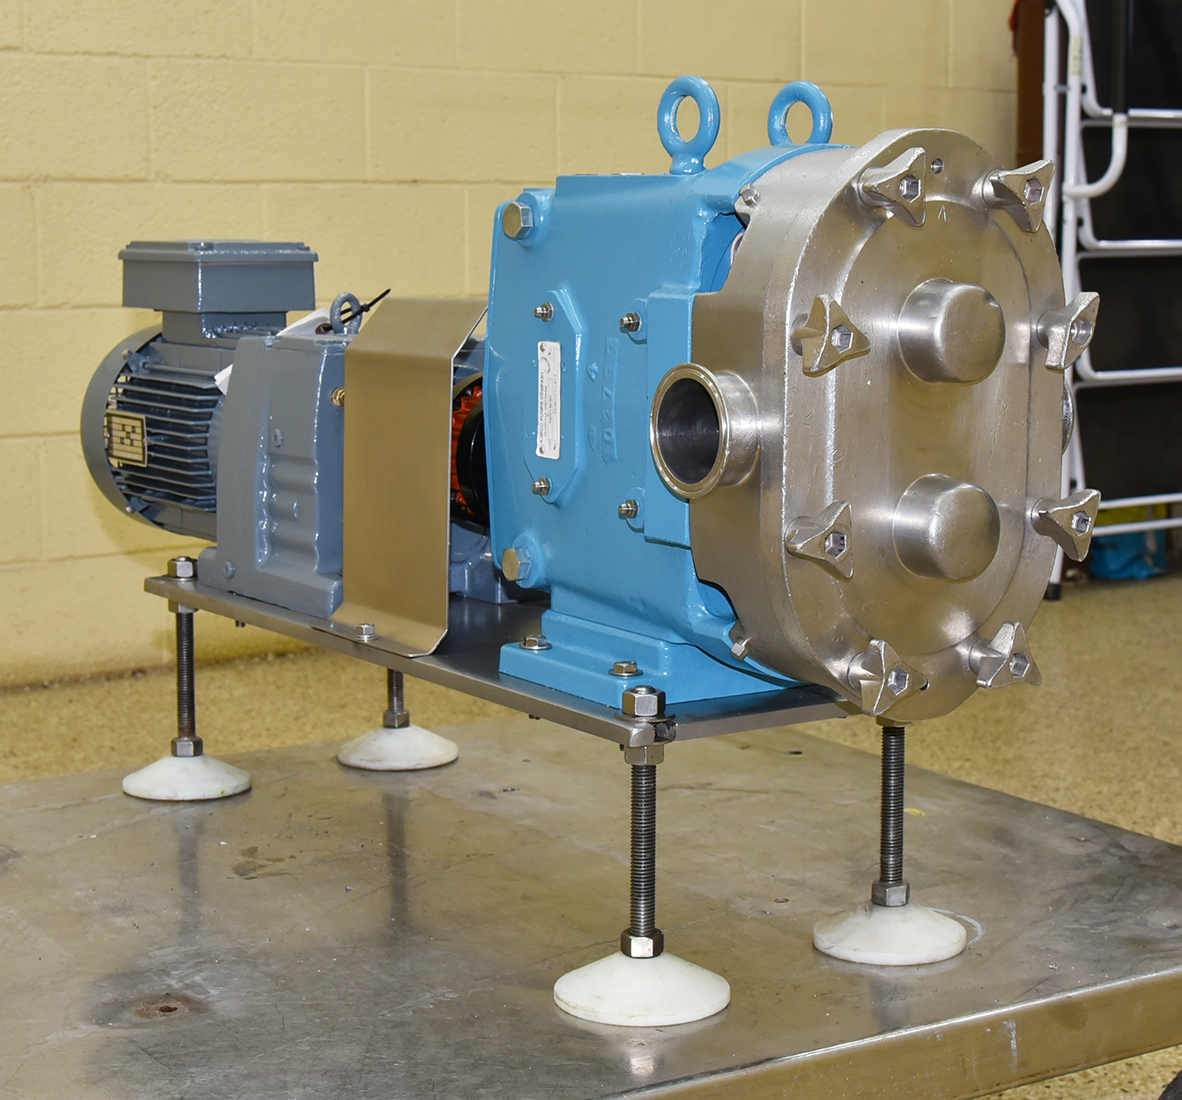 Used Waukesha 60 lobe pump / positive displacement pump, part for part equivalent, Ampco 60, 3HP motor, 2.5 inch in/out, 3A dairy sanitary, Alard item Y5469